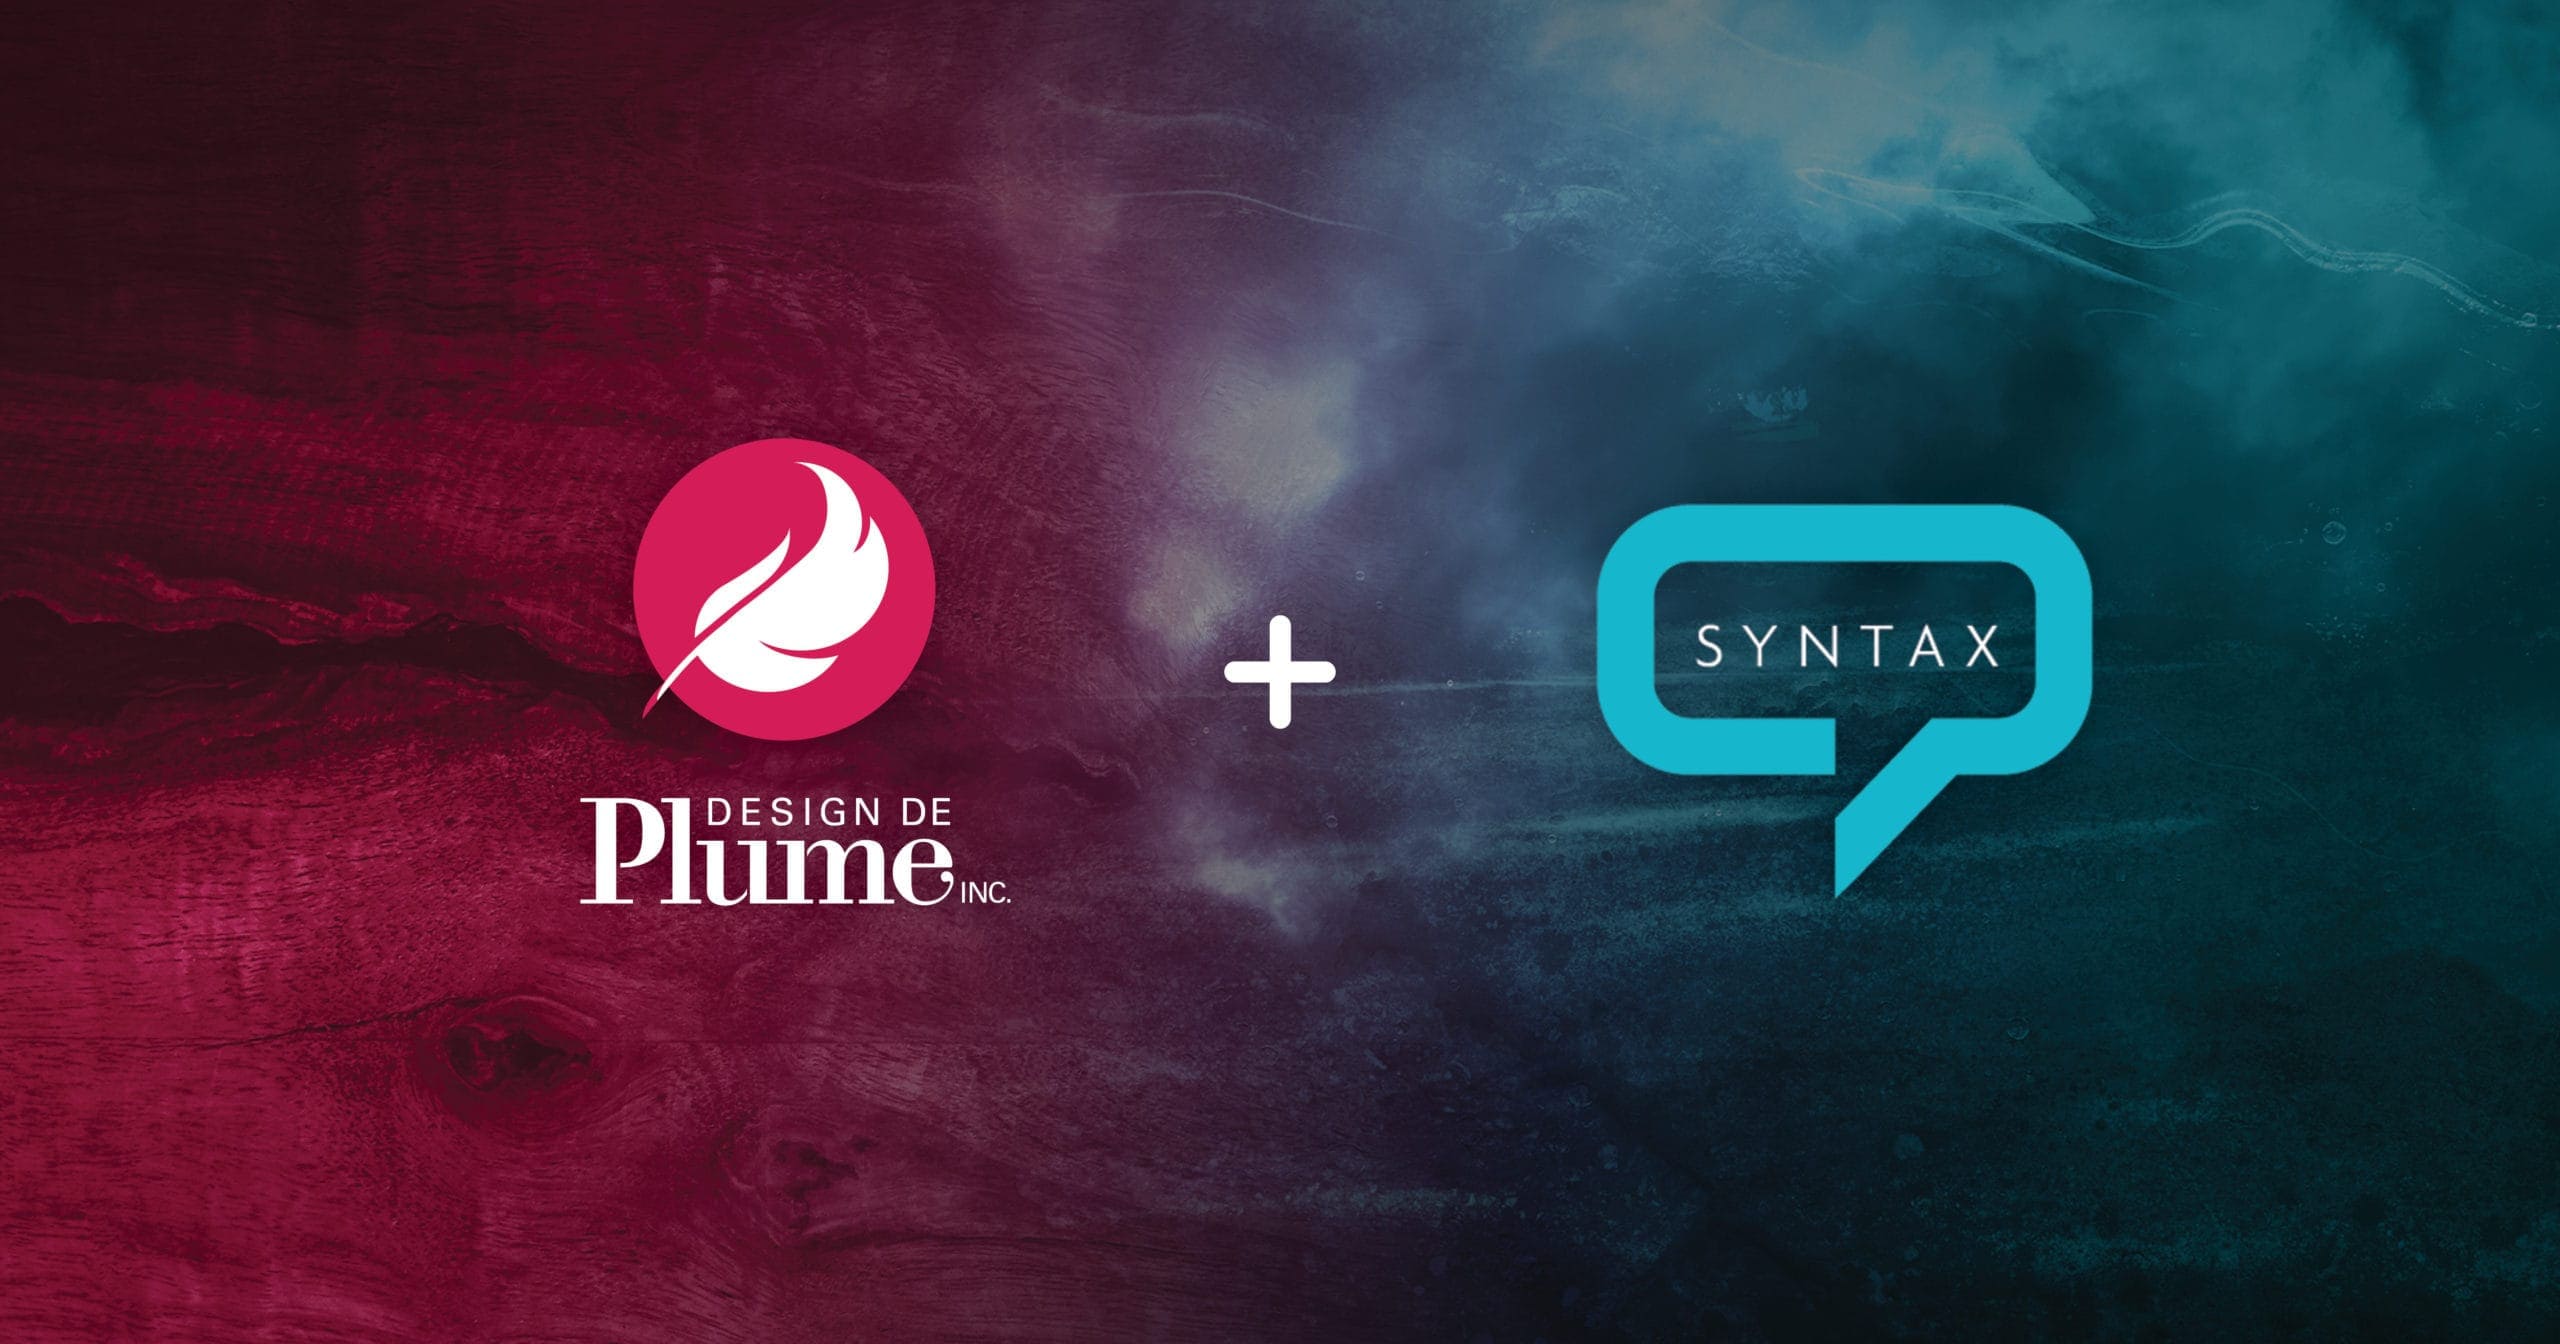 The logos for Design de Plume and Syntax are shown in partnership